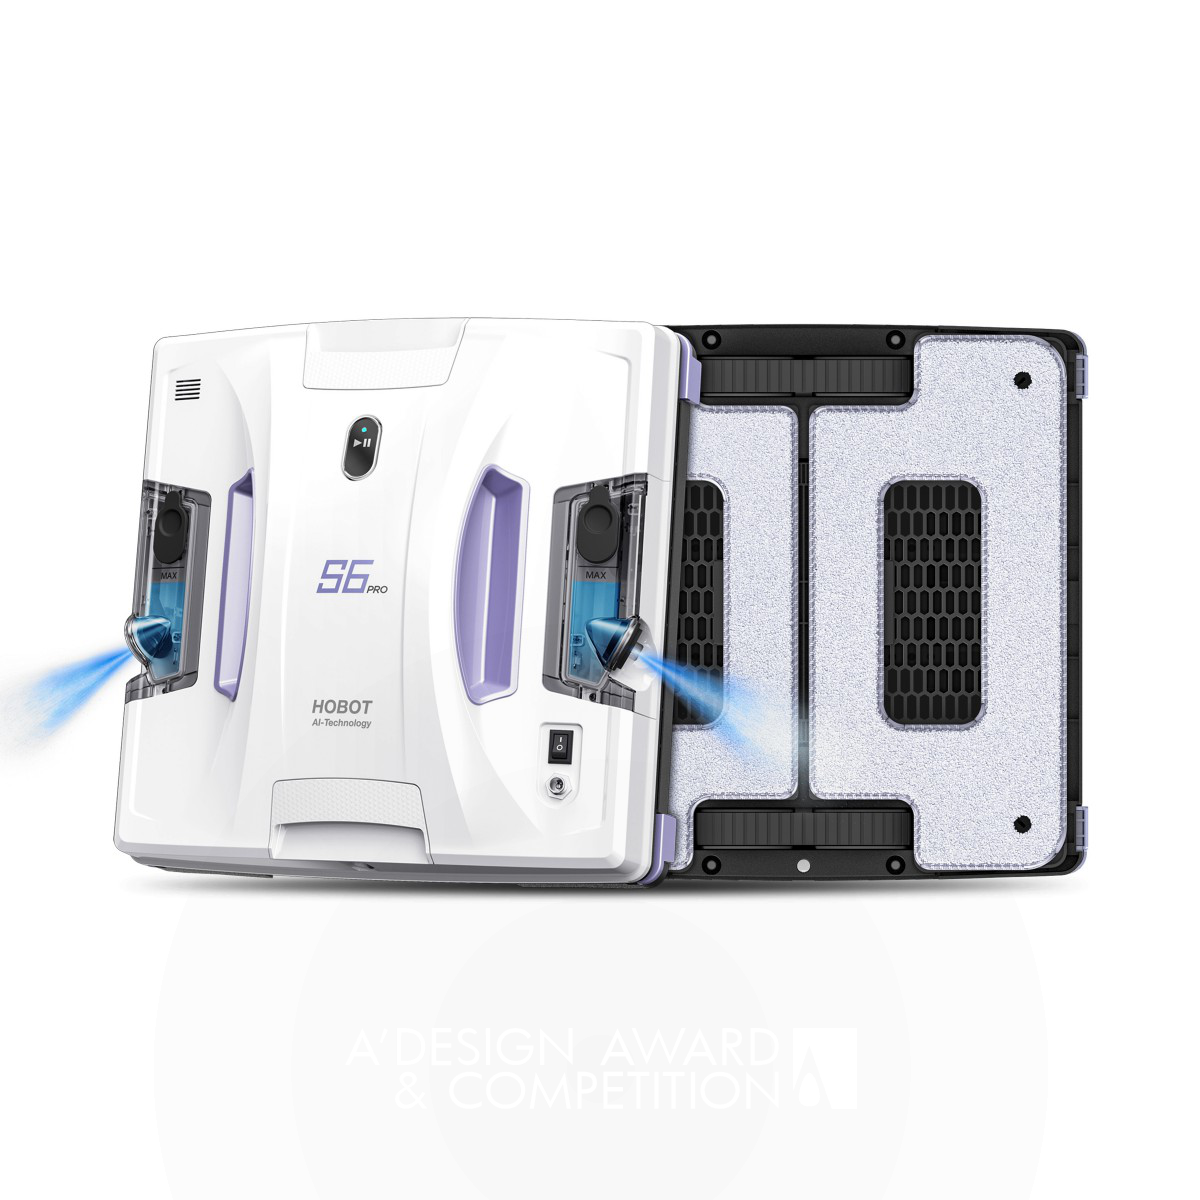 Hobot S6 Pro  Window Cleaning Robot by Hobot Technology Inc.